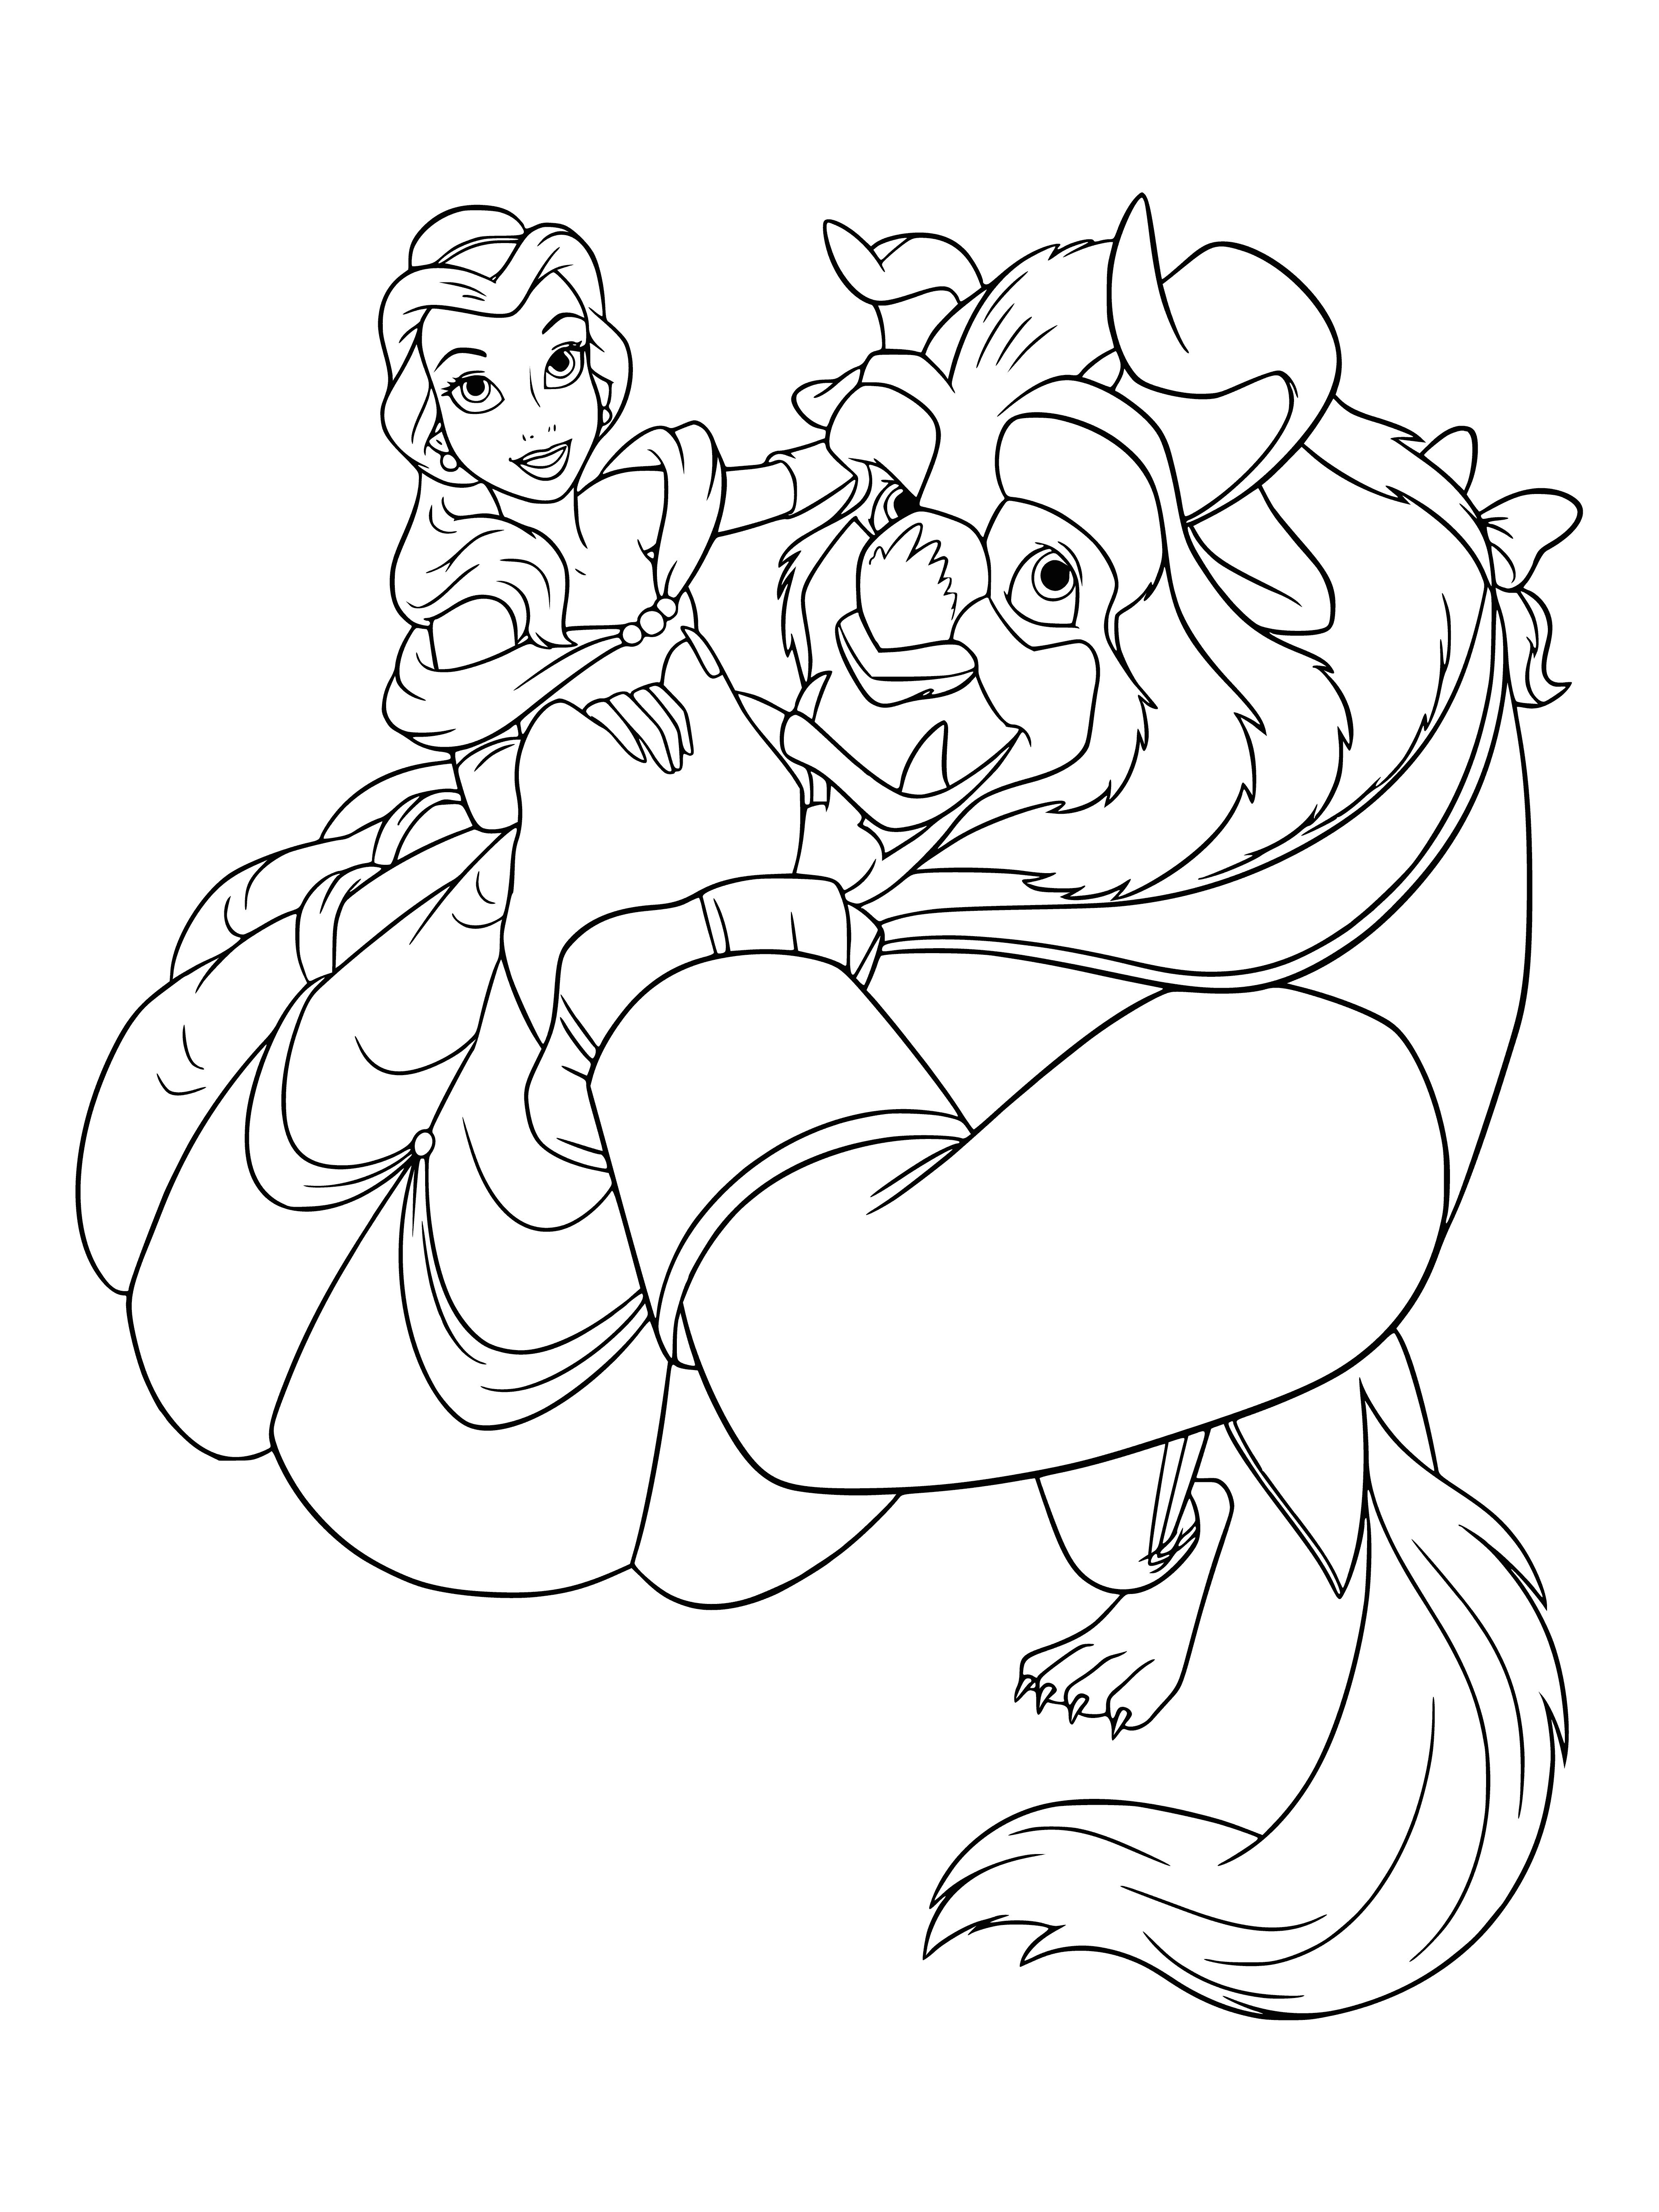 Magic dance coloring page